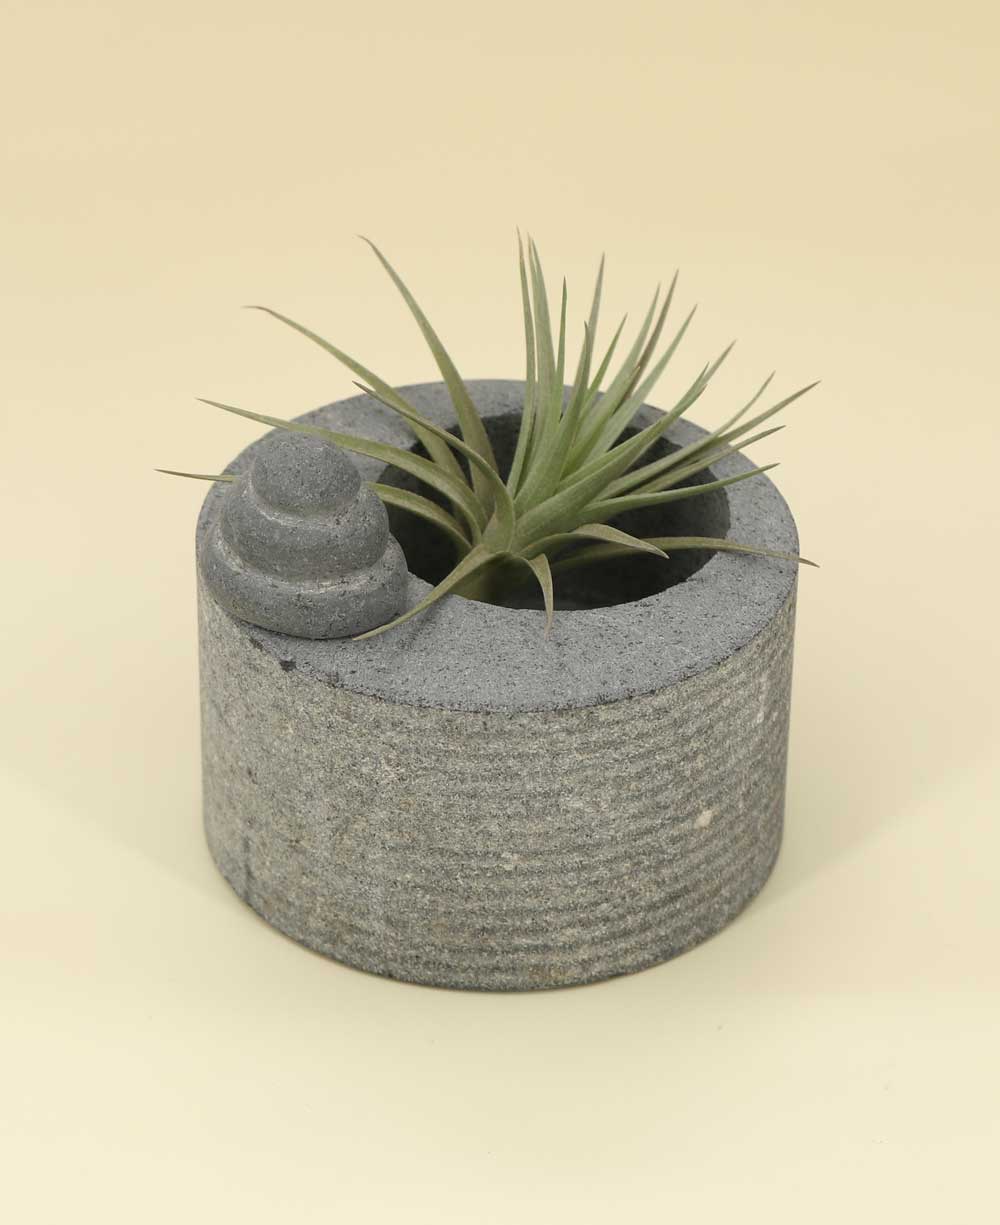 Small Cairn Rock Candle or Succulent Desktop Holder - Candle Holders